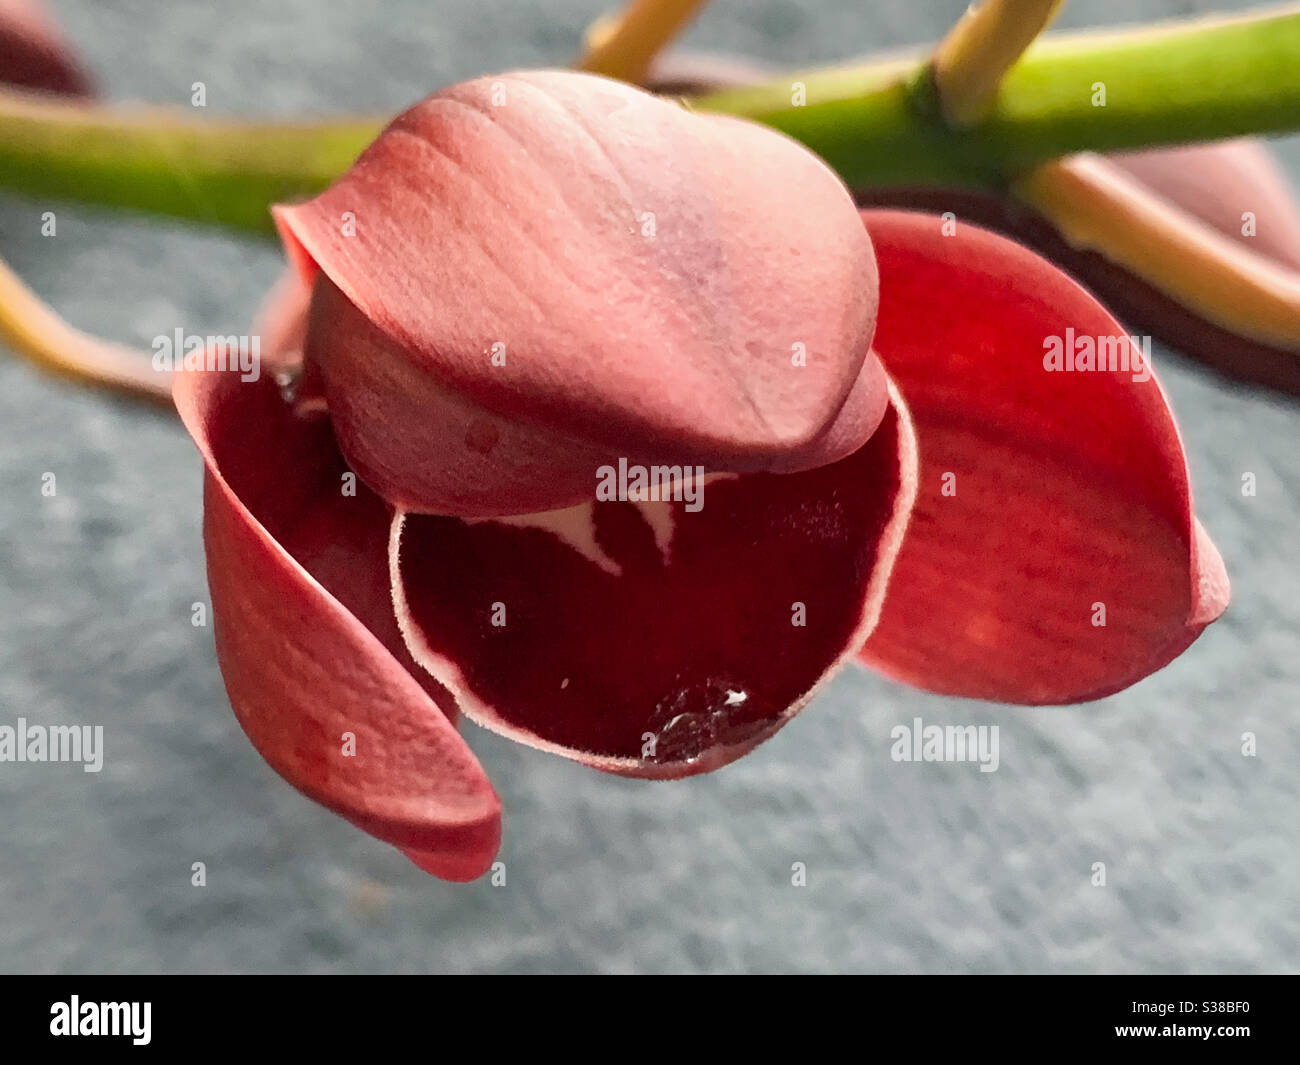 A partially open cymbidium orchid flower harbouring a water droplet at its mouth Stock Photo